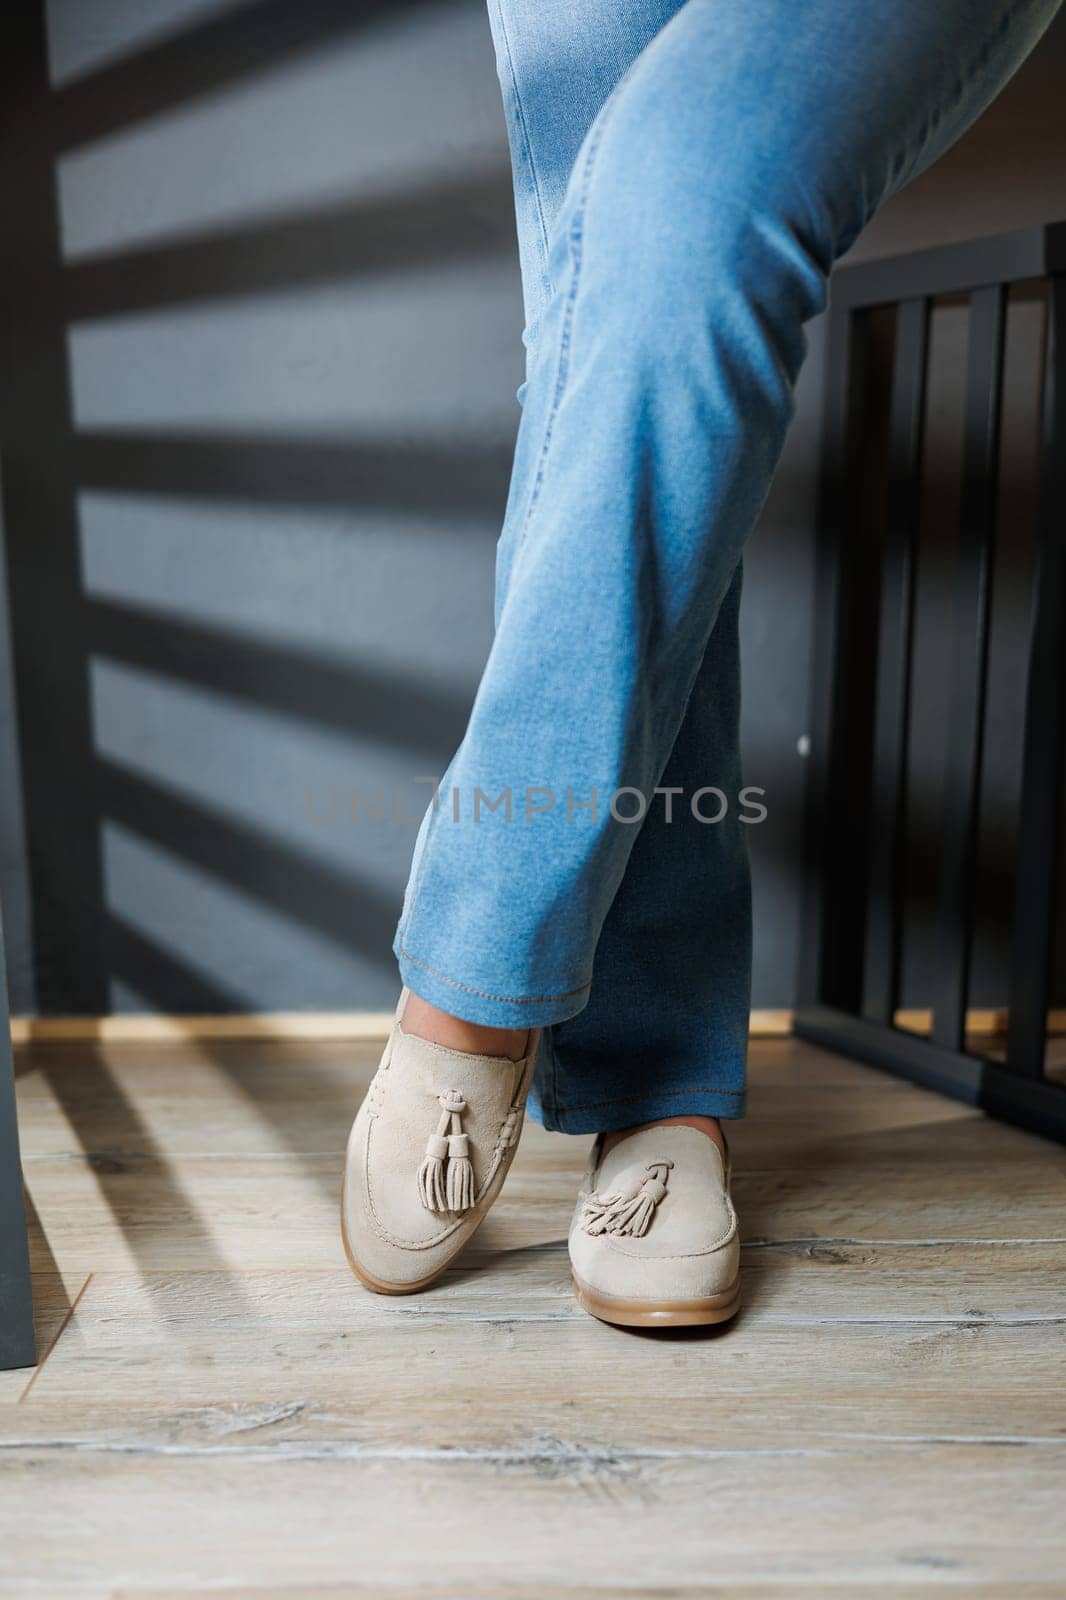 Slender female legs in jeans and beige loafers. Collection of summer women's shoes. Stylish women's shoes for summer